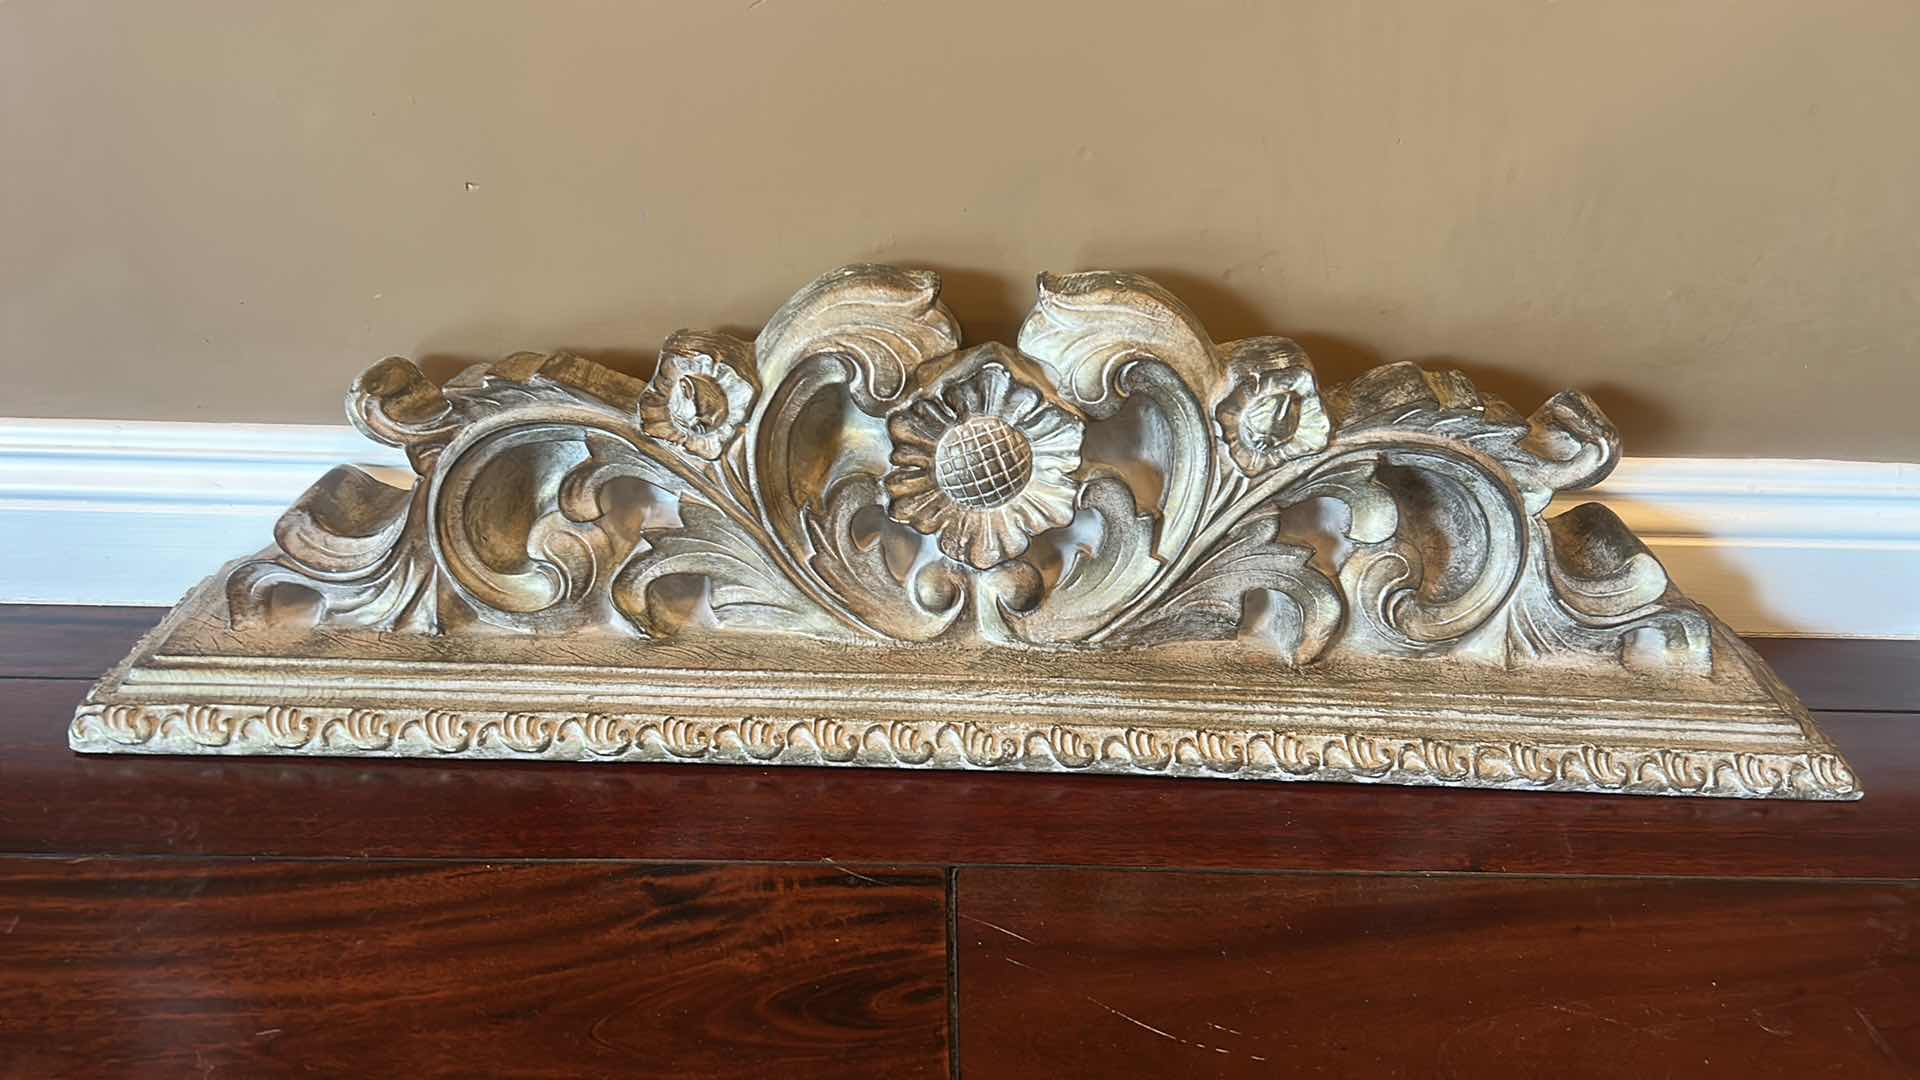 Photo 4 of HEAVY PLASTER WALL SHELF OR SHELF DECOR 3’ x 6” x 9” (WAS DISPLAYED UPSIDE DOWN ON TOP OF KITCHEN CABINETS)